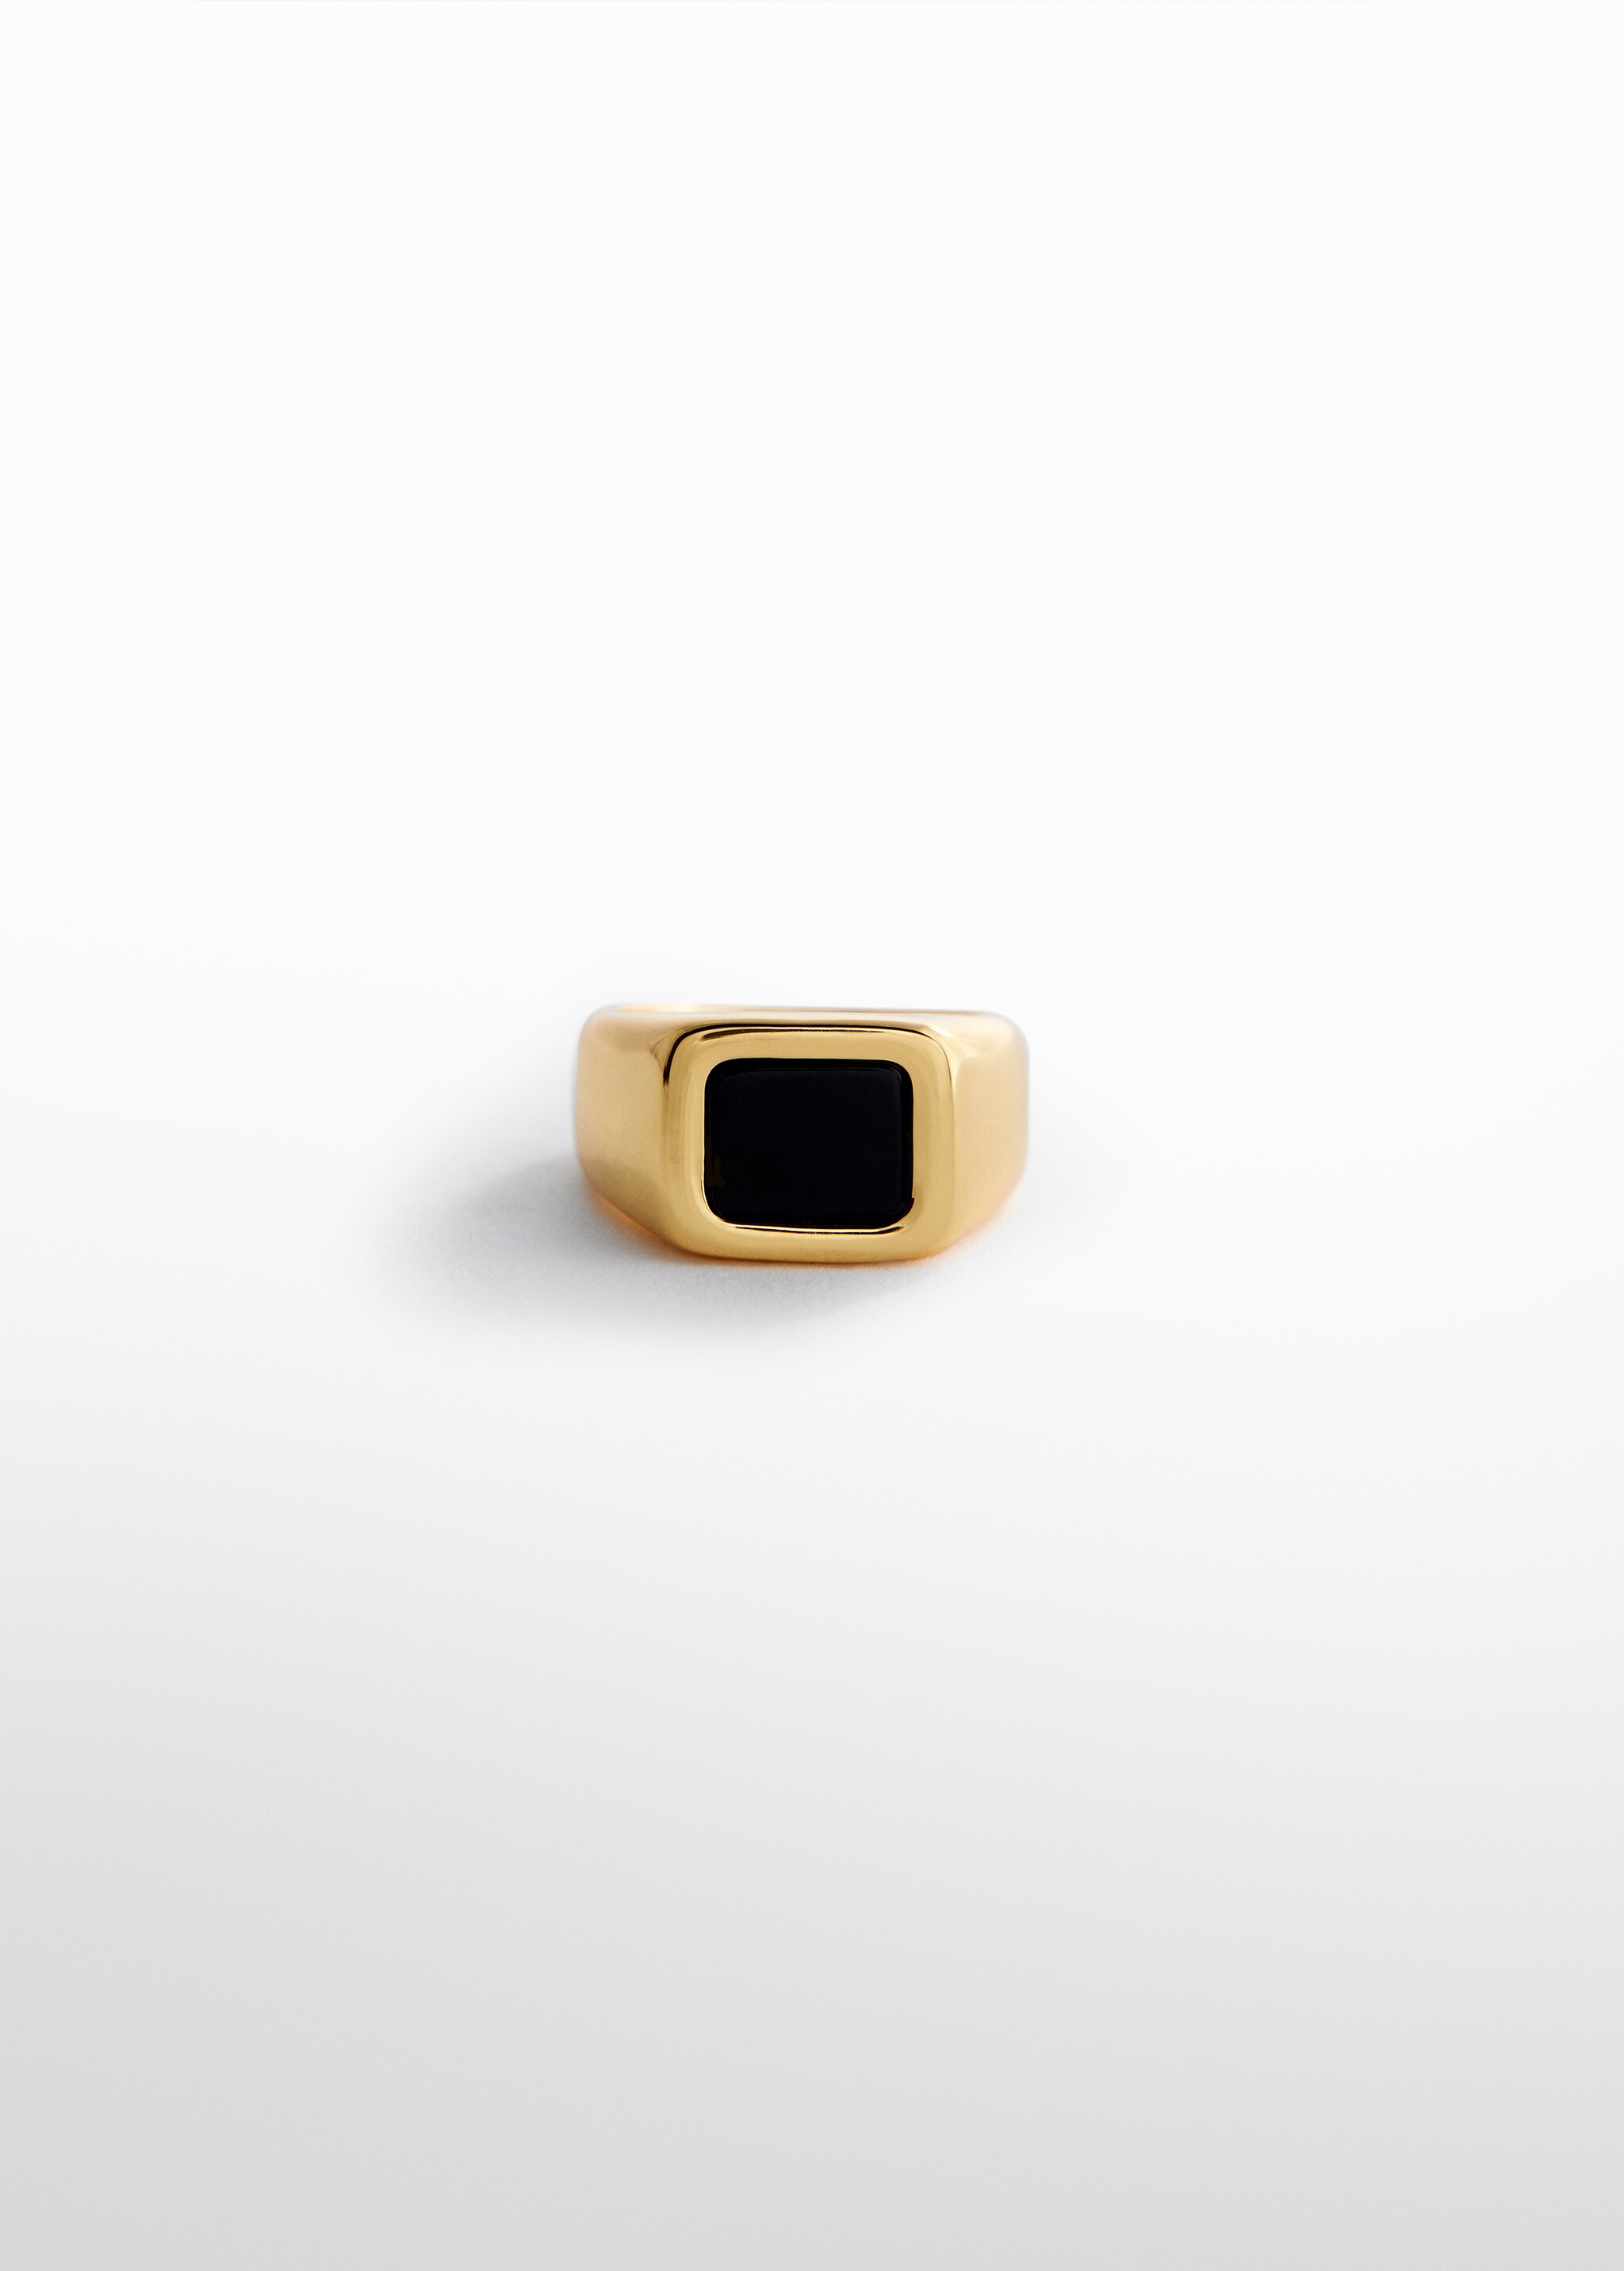 18K signet ring - Article without model